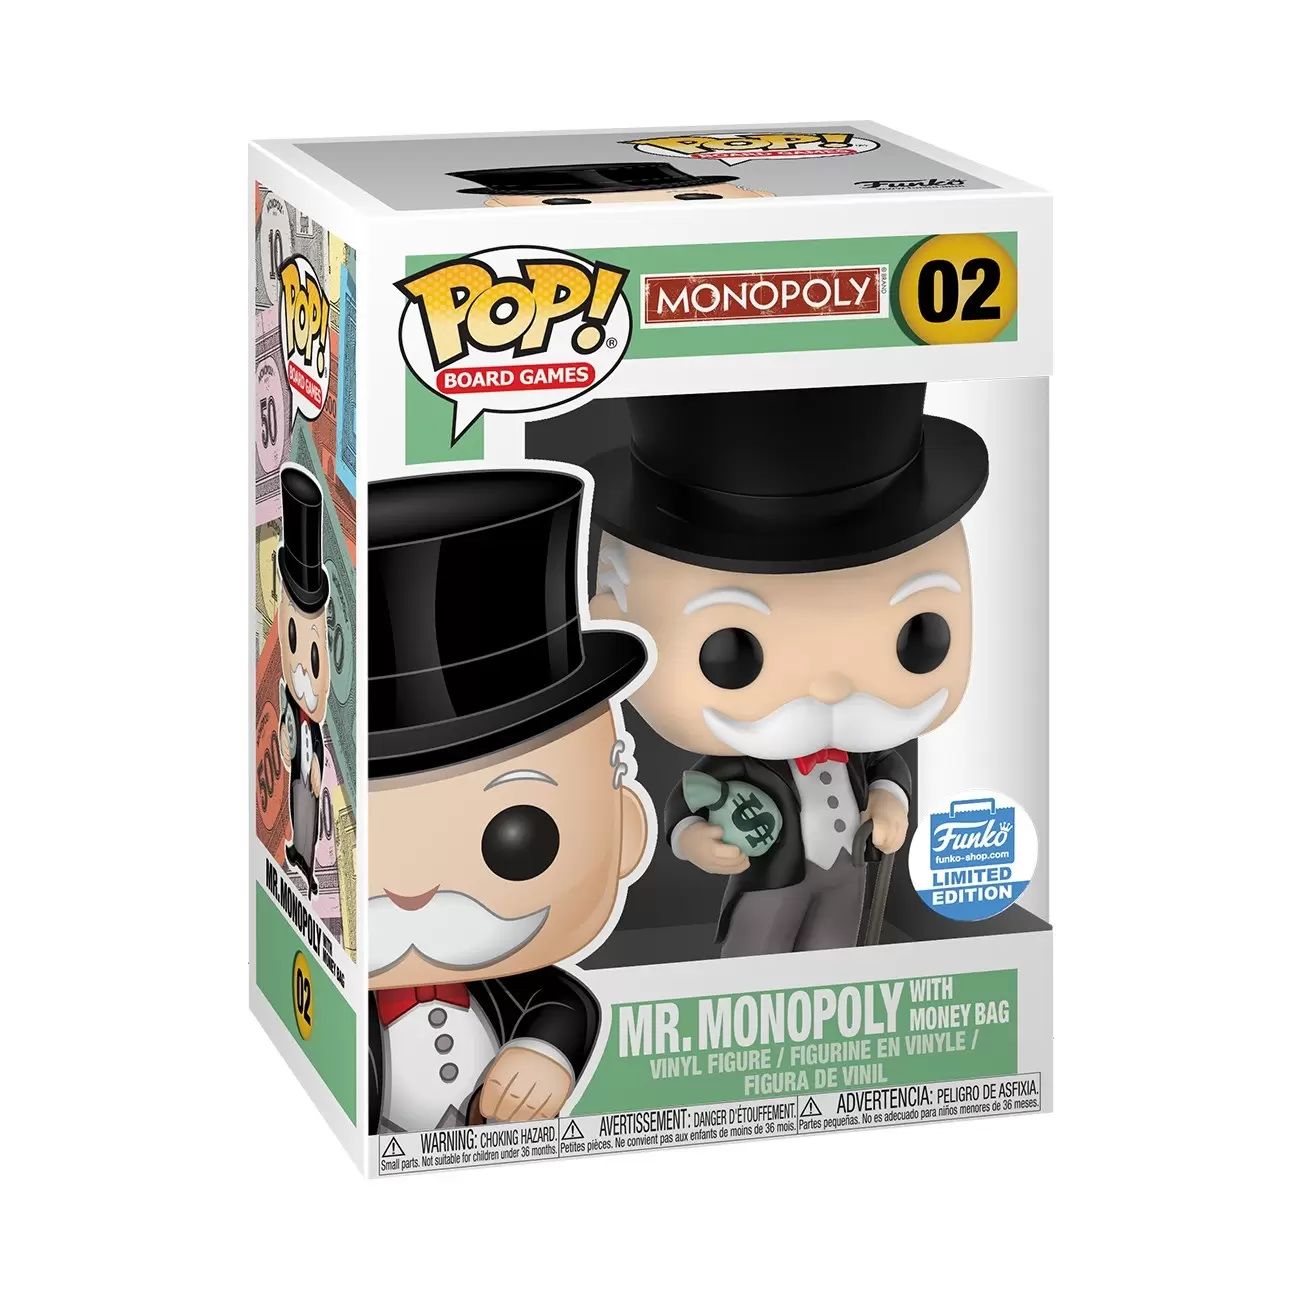 POP! Board Game - Mr. Monopoly with Money Bag